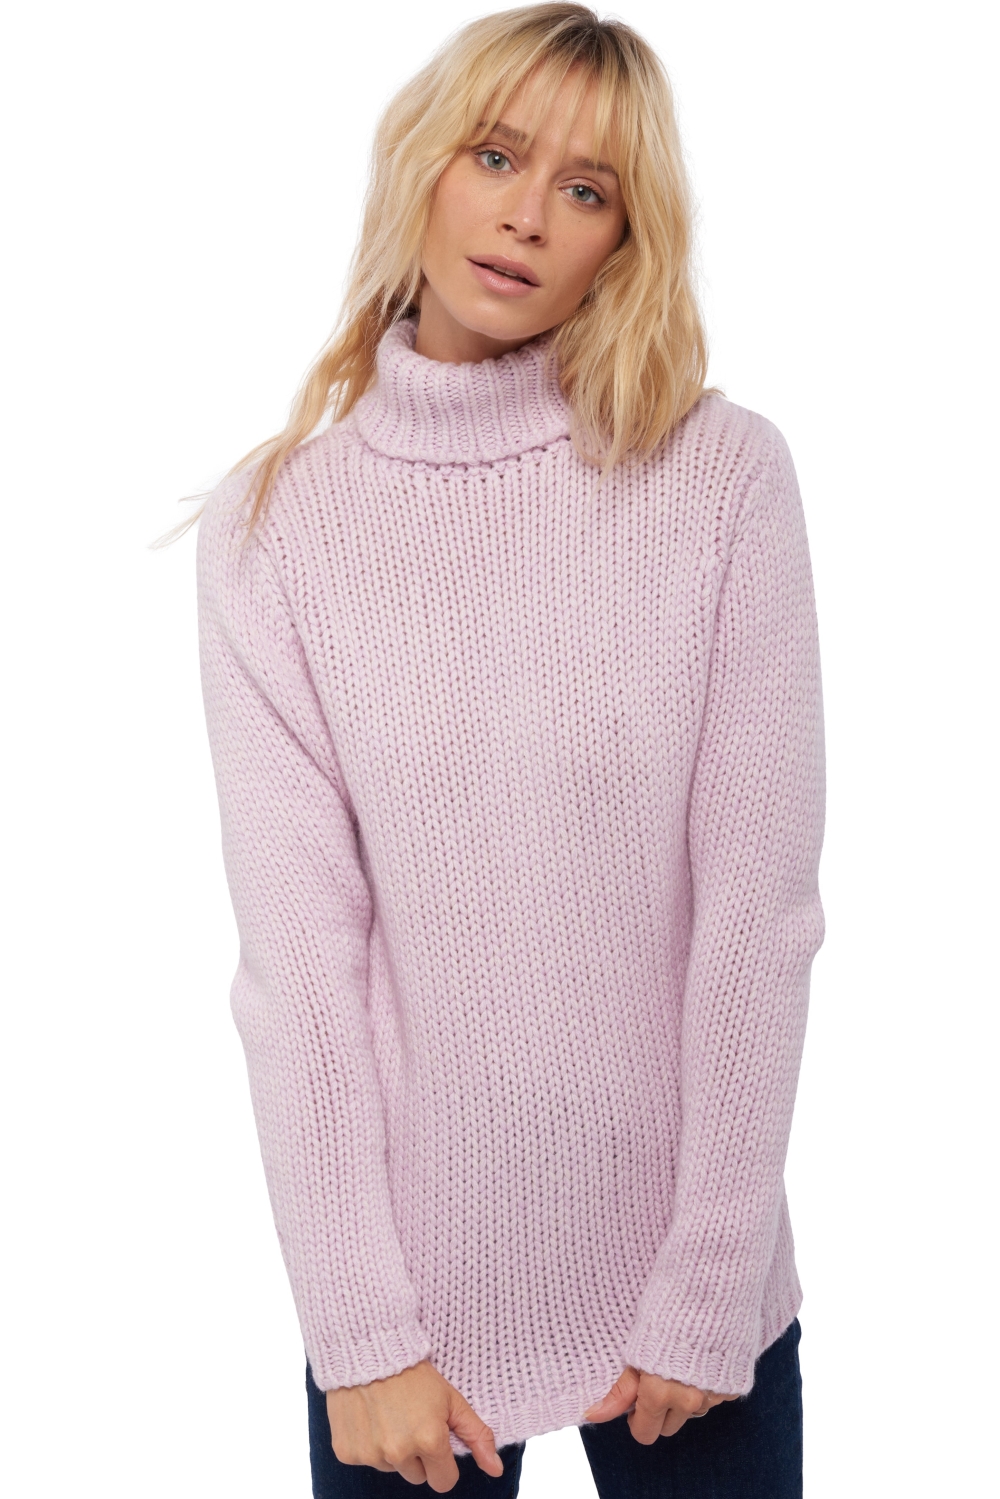 Cachemire pull femme col roule vicenza lilas rose pale xs